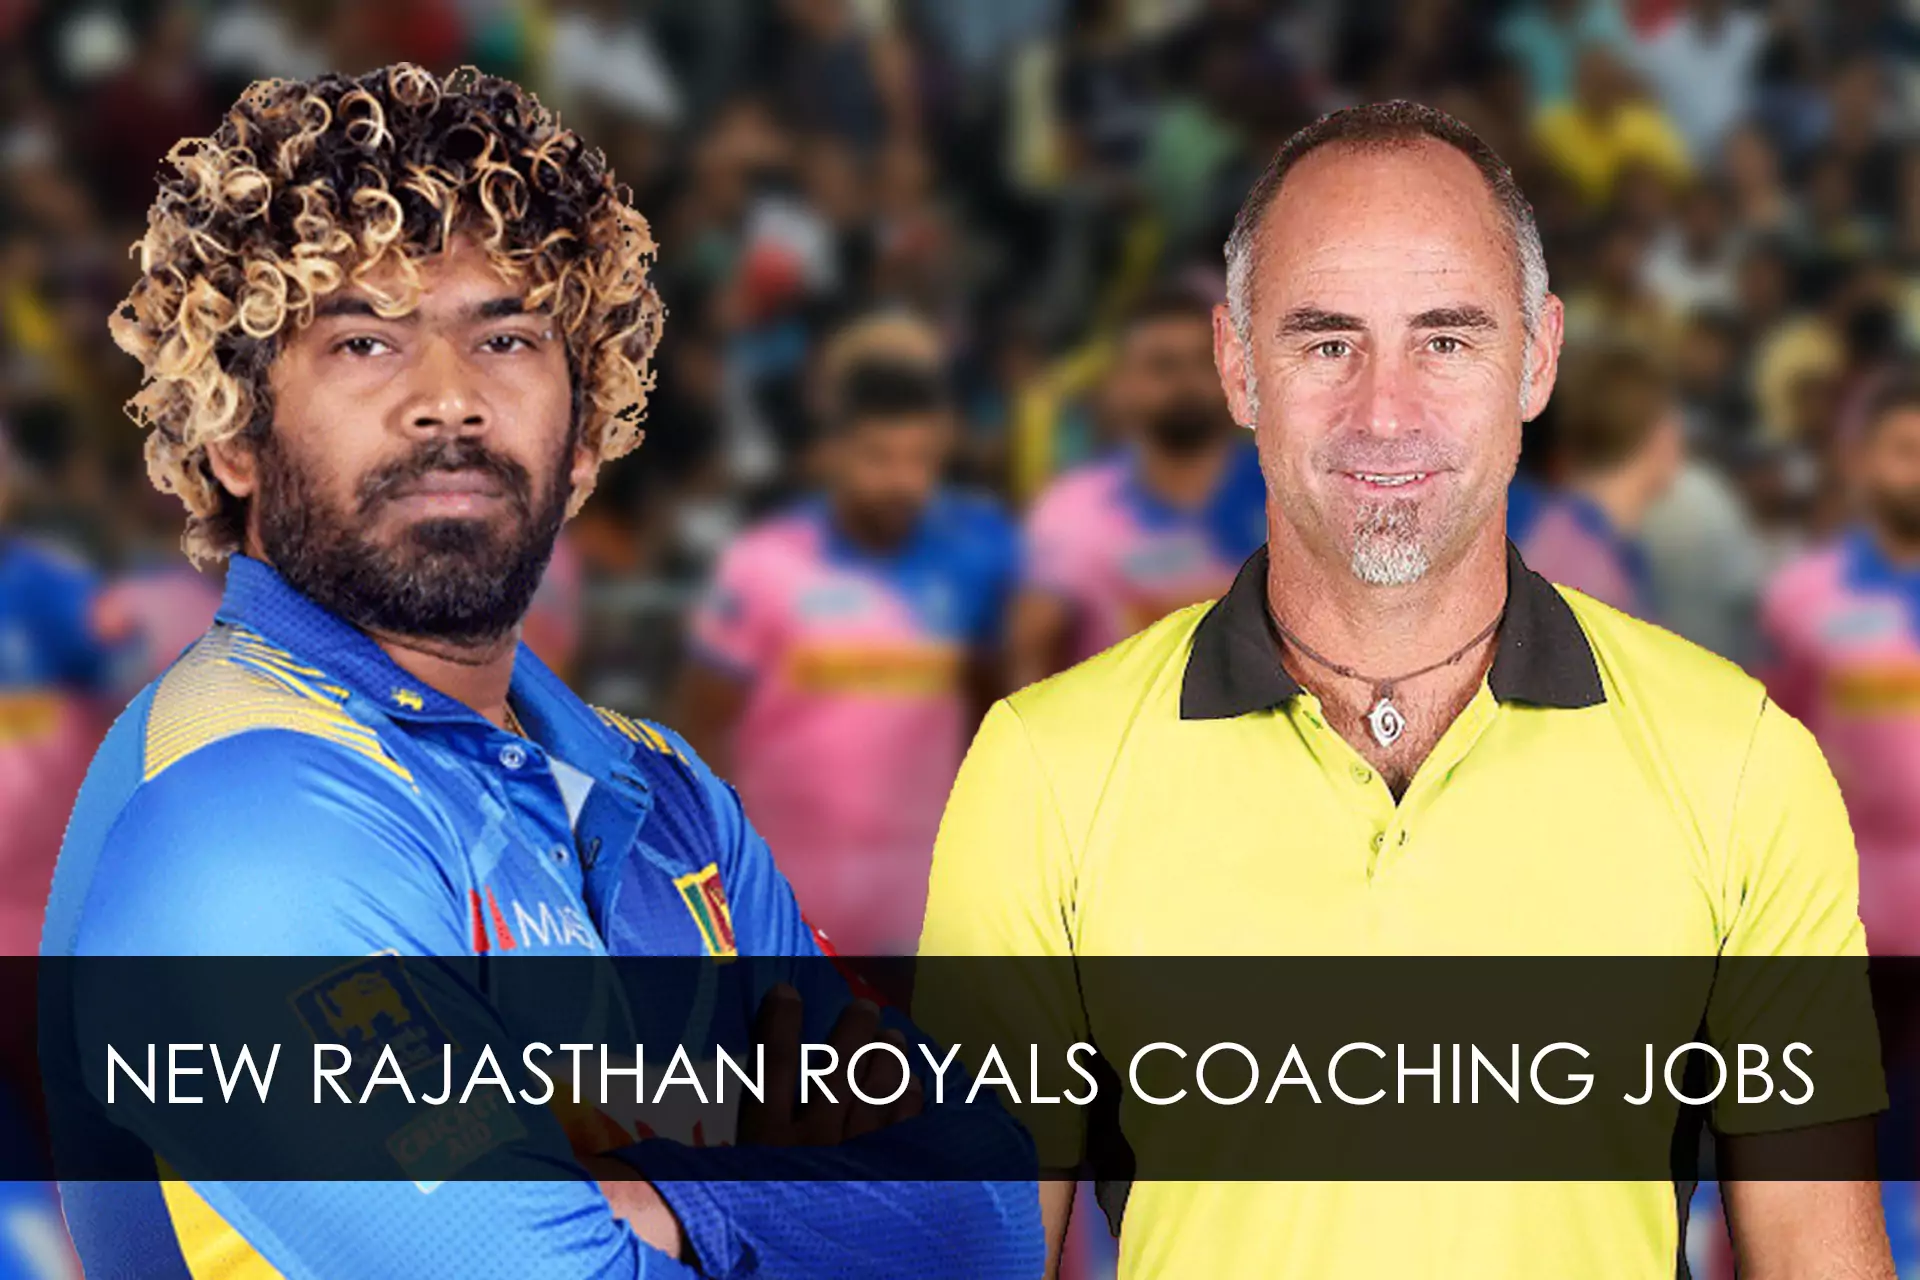 Read about Two new Rajasthan Royals coaching jobs for Lasith Malinga and Paddy Upton.